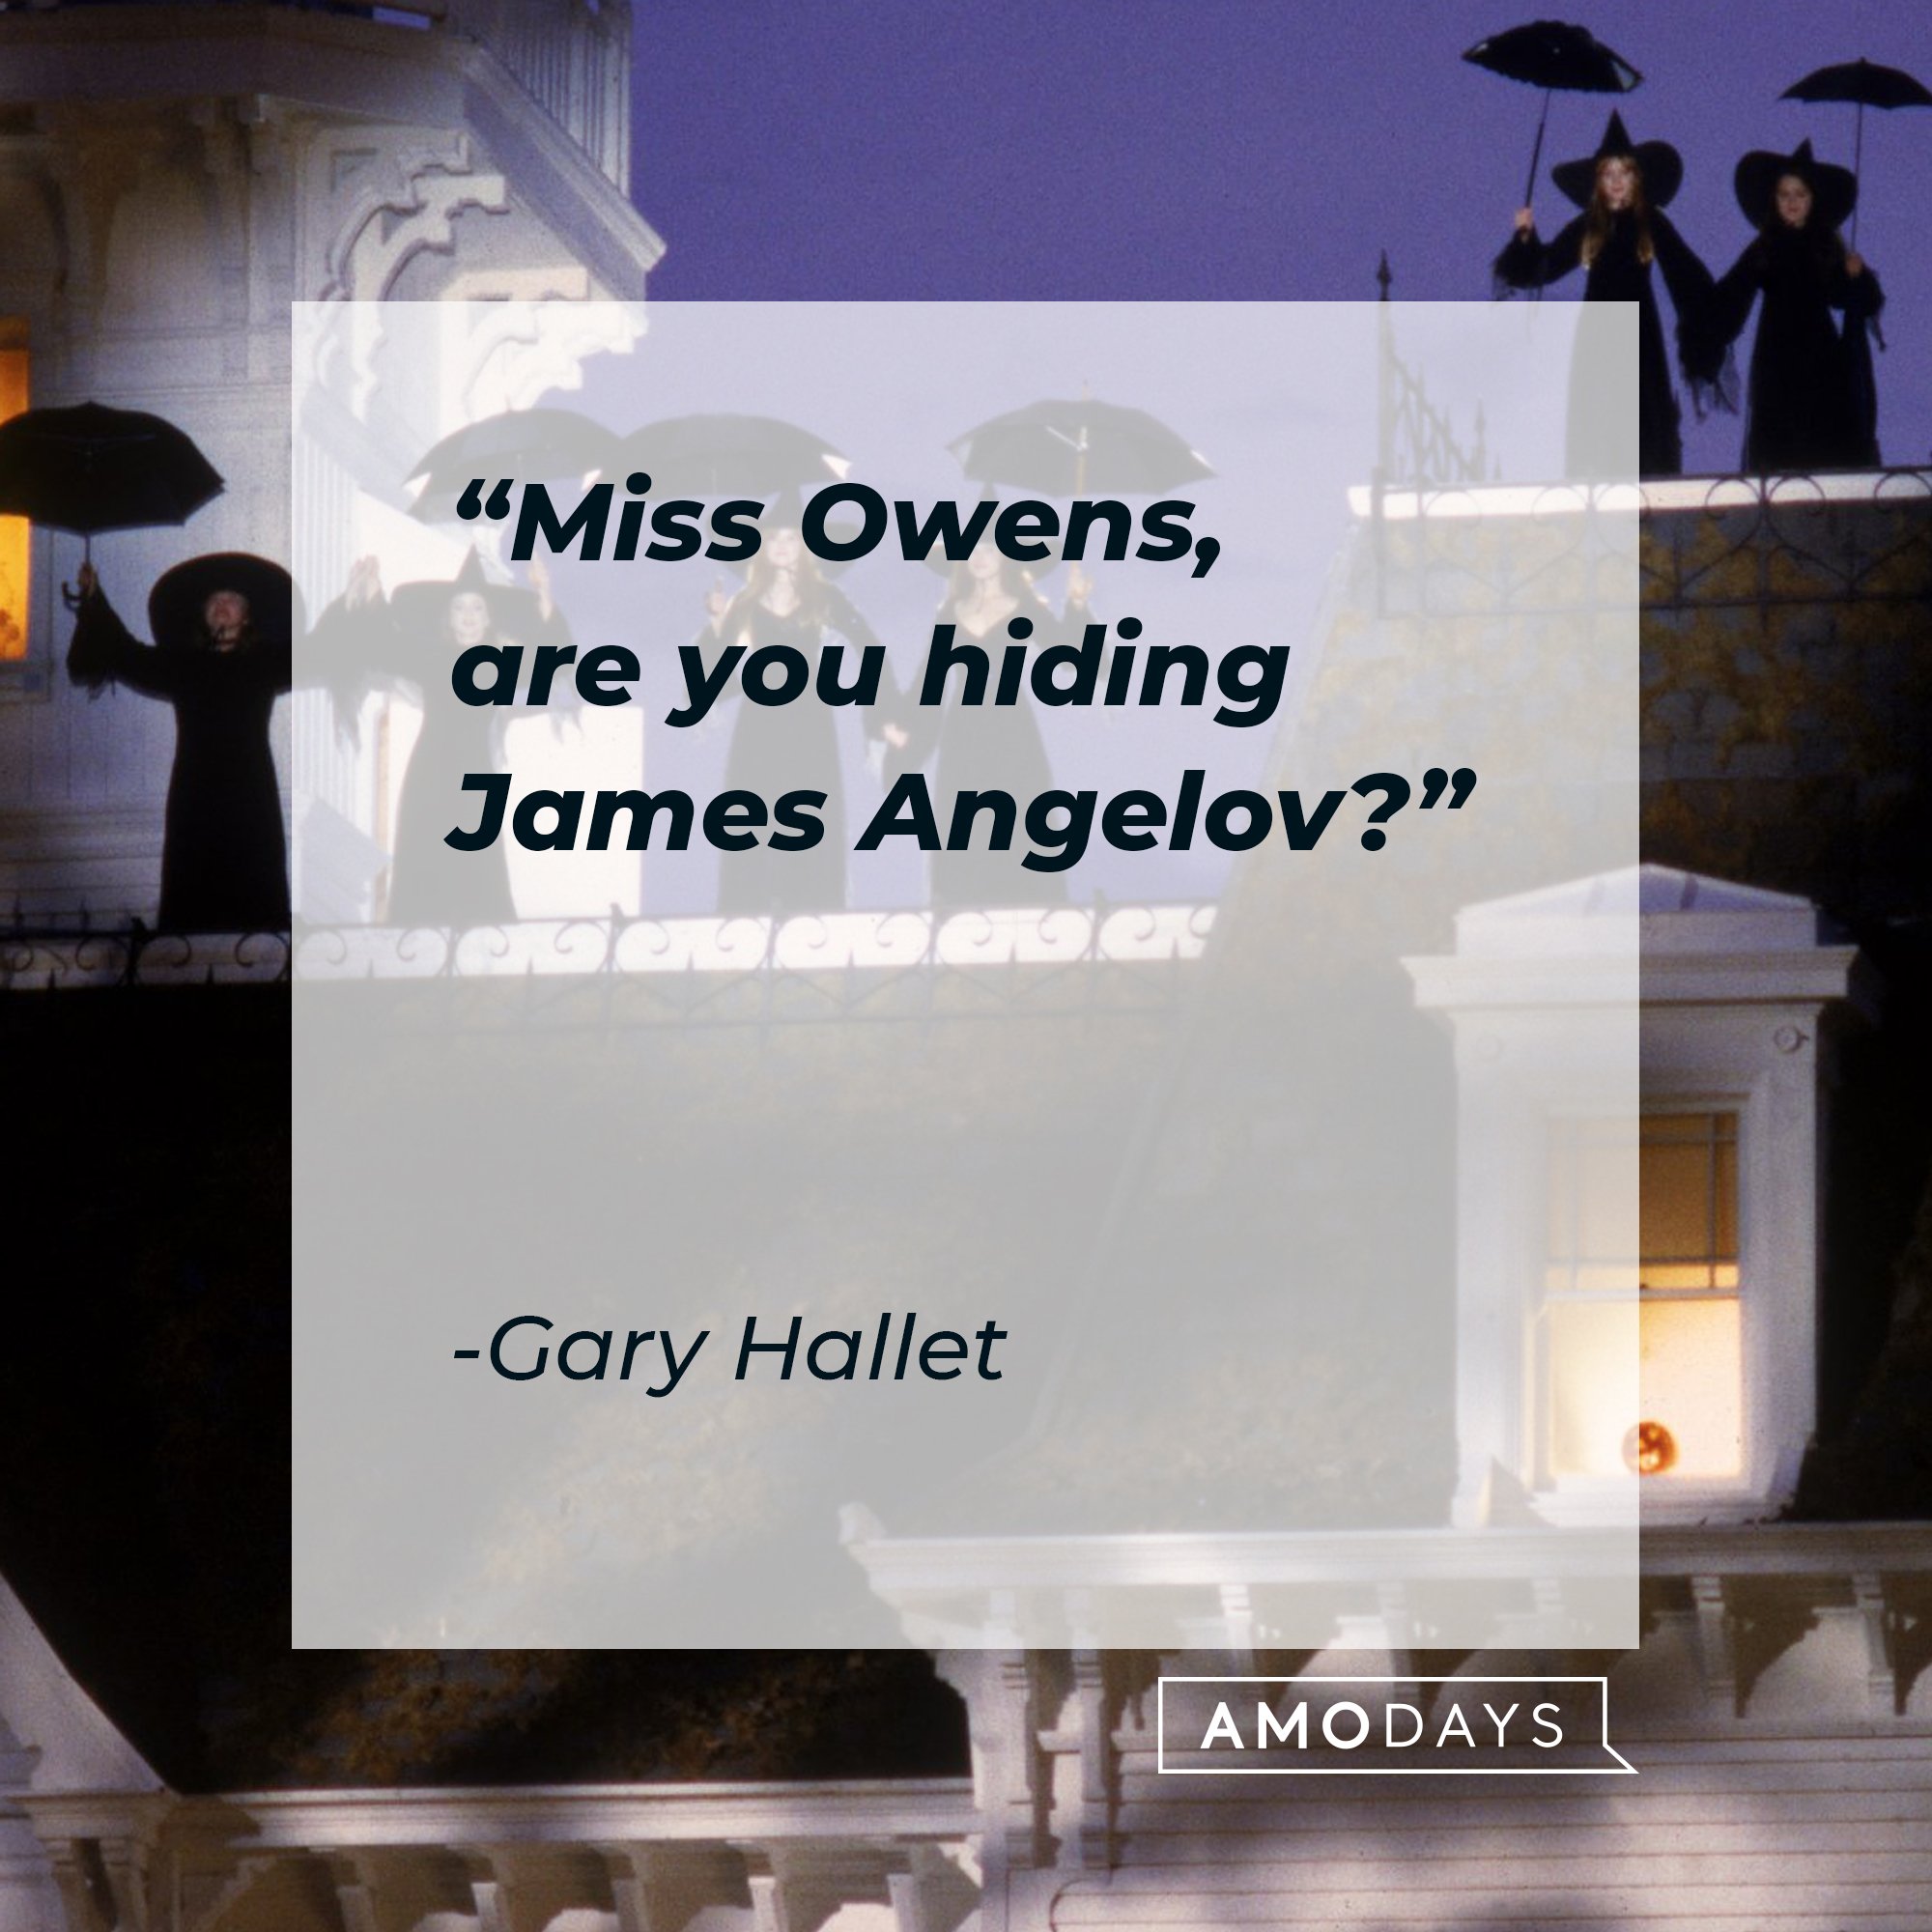 Gary Hallet's quote: "Miss Owens, are you hiding James Angelov?" | Image: AmoDays